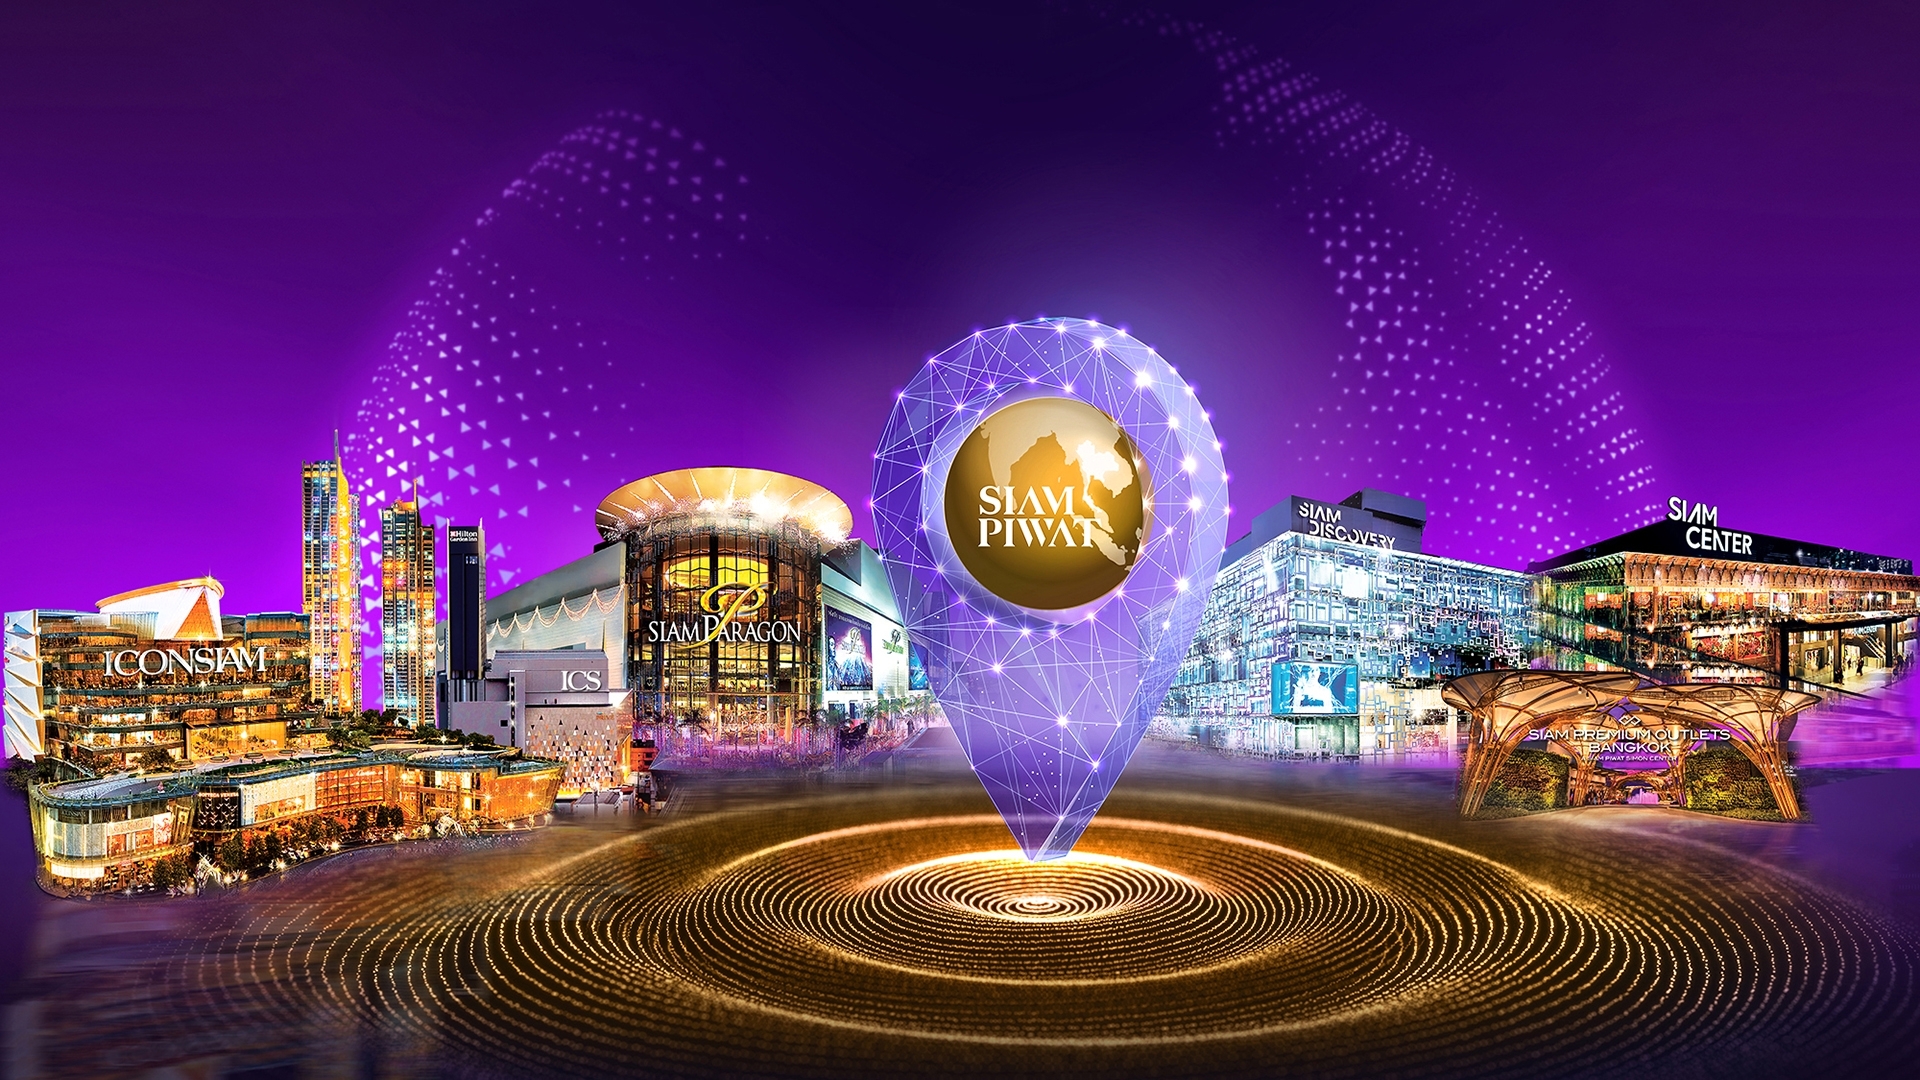 6 World-Class Experiential Destinations under Siam Piwat, including award-winning Siam Paragon and ICONSIAM.